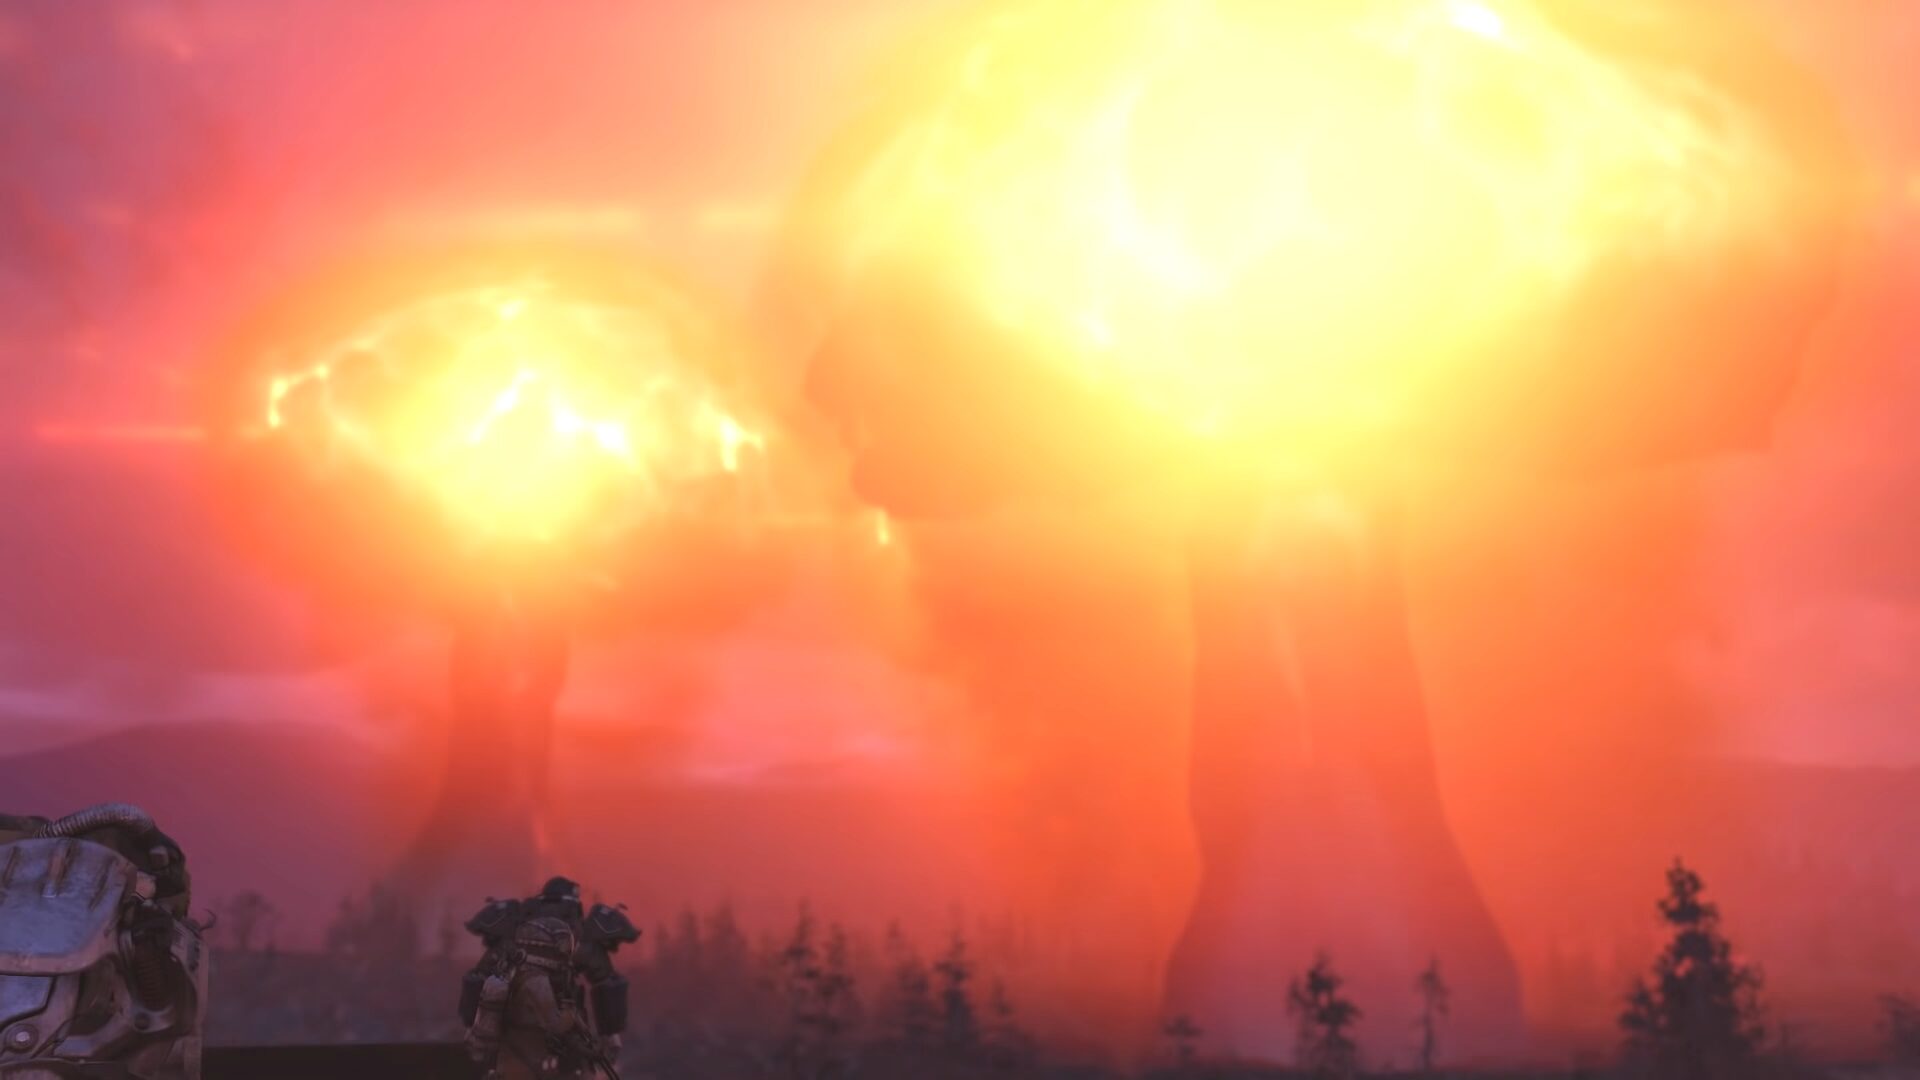 Fallout 76 Servers Get Nuked From In-Game Triple Nuke Launch